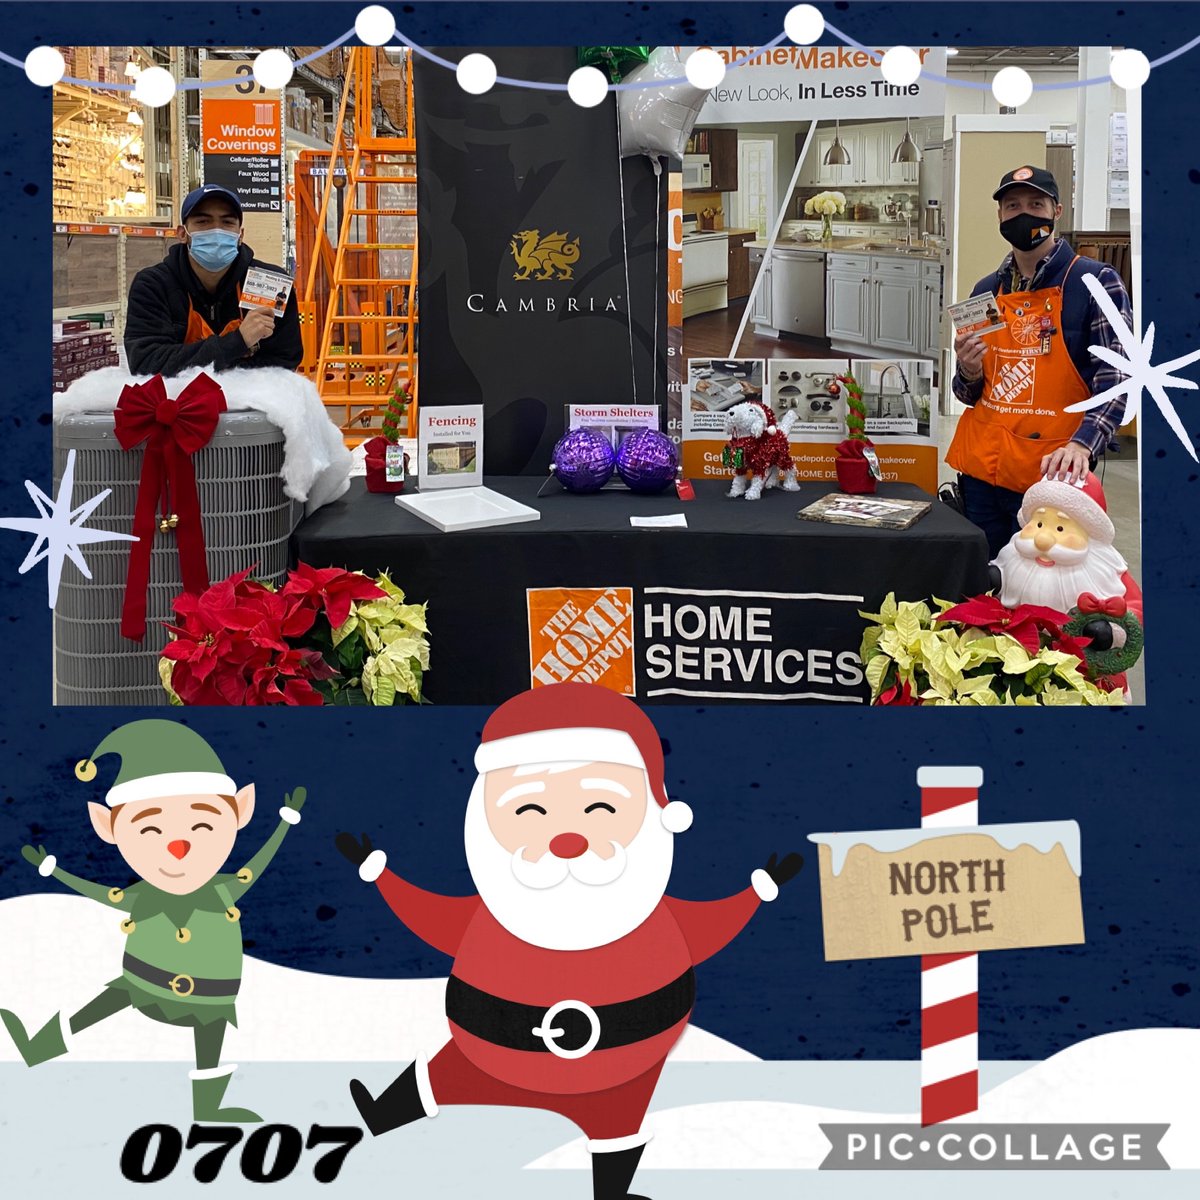 PASA Jose & D30 Specialist Breez assisting w the Home Services table today🙏 Great engagement & fun for the customers👌Thank you two for being part of the TEAM💛🍑 @AndreaMcTHD @kmn293 @PennyWorleyTHD @ScottRoop #HEIDIHVACChallengev2020 #SATLServicesevent